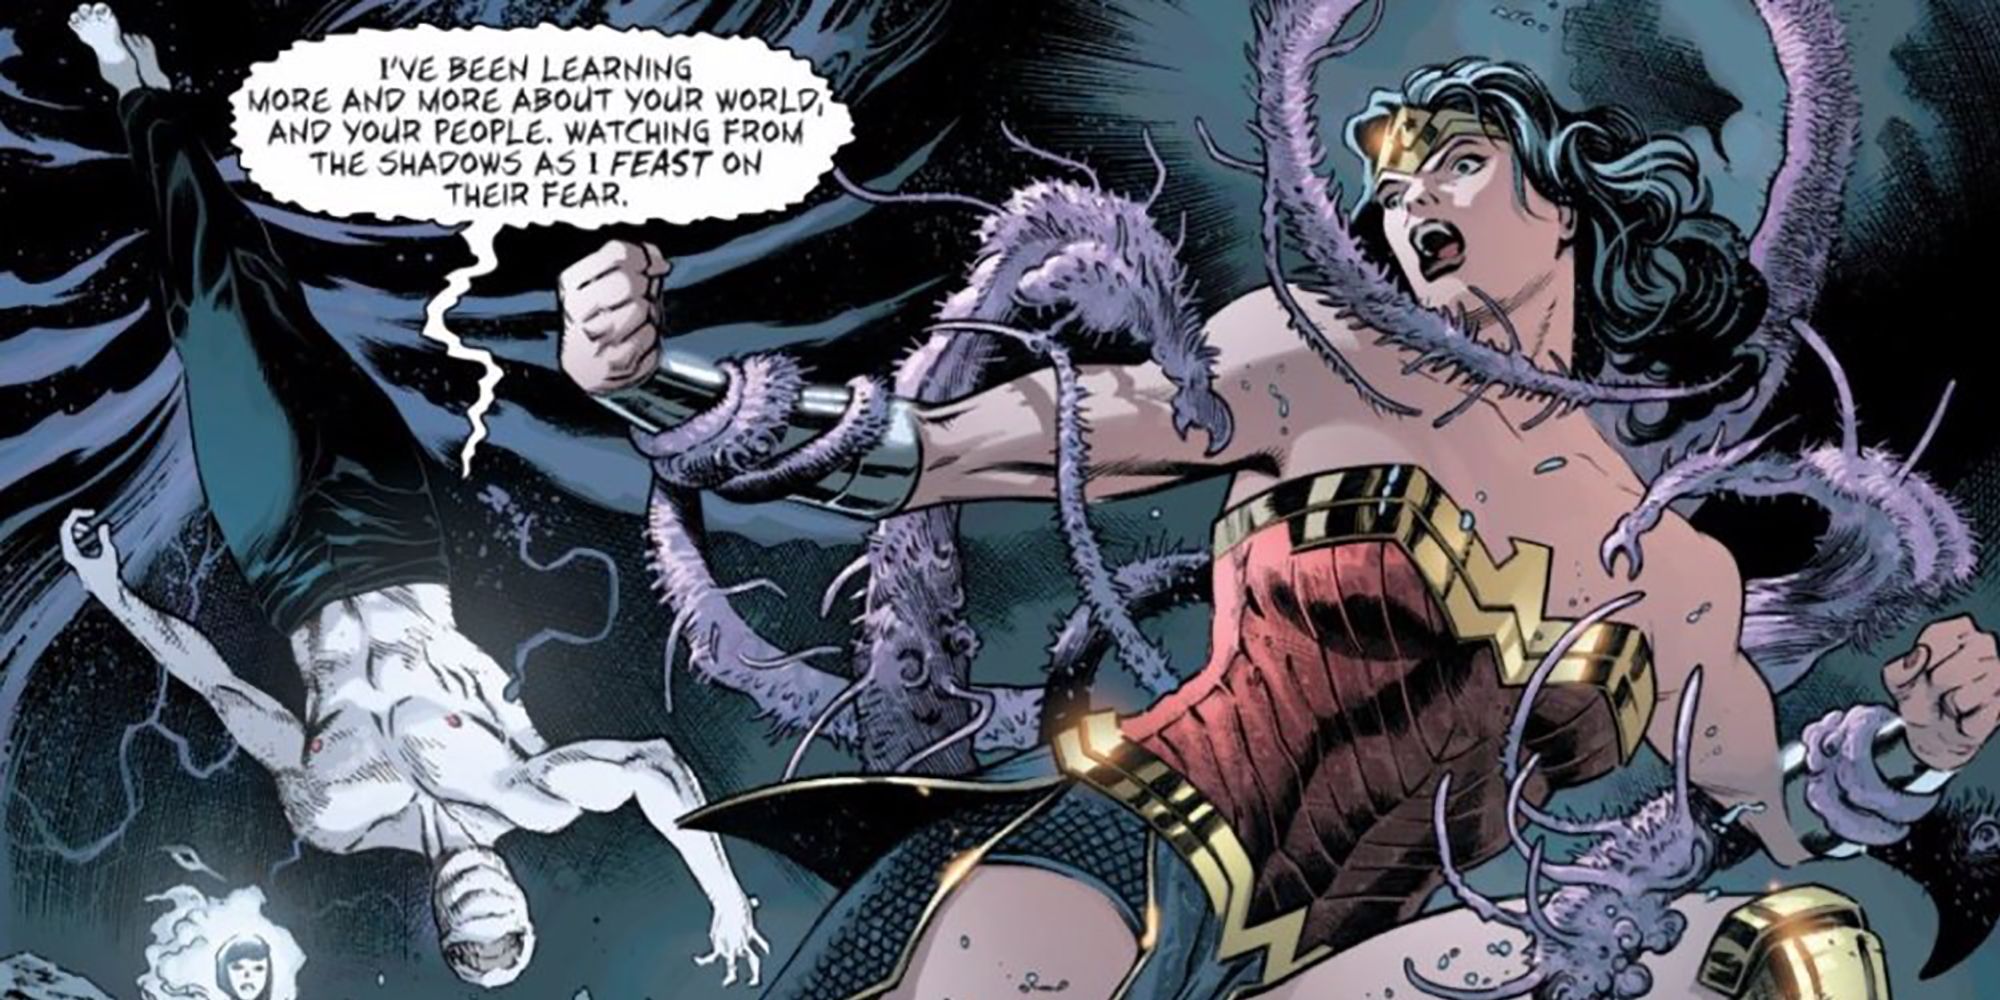 Wonder Woman Defeated By Upside Down Man